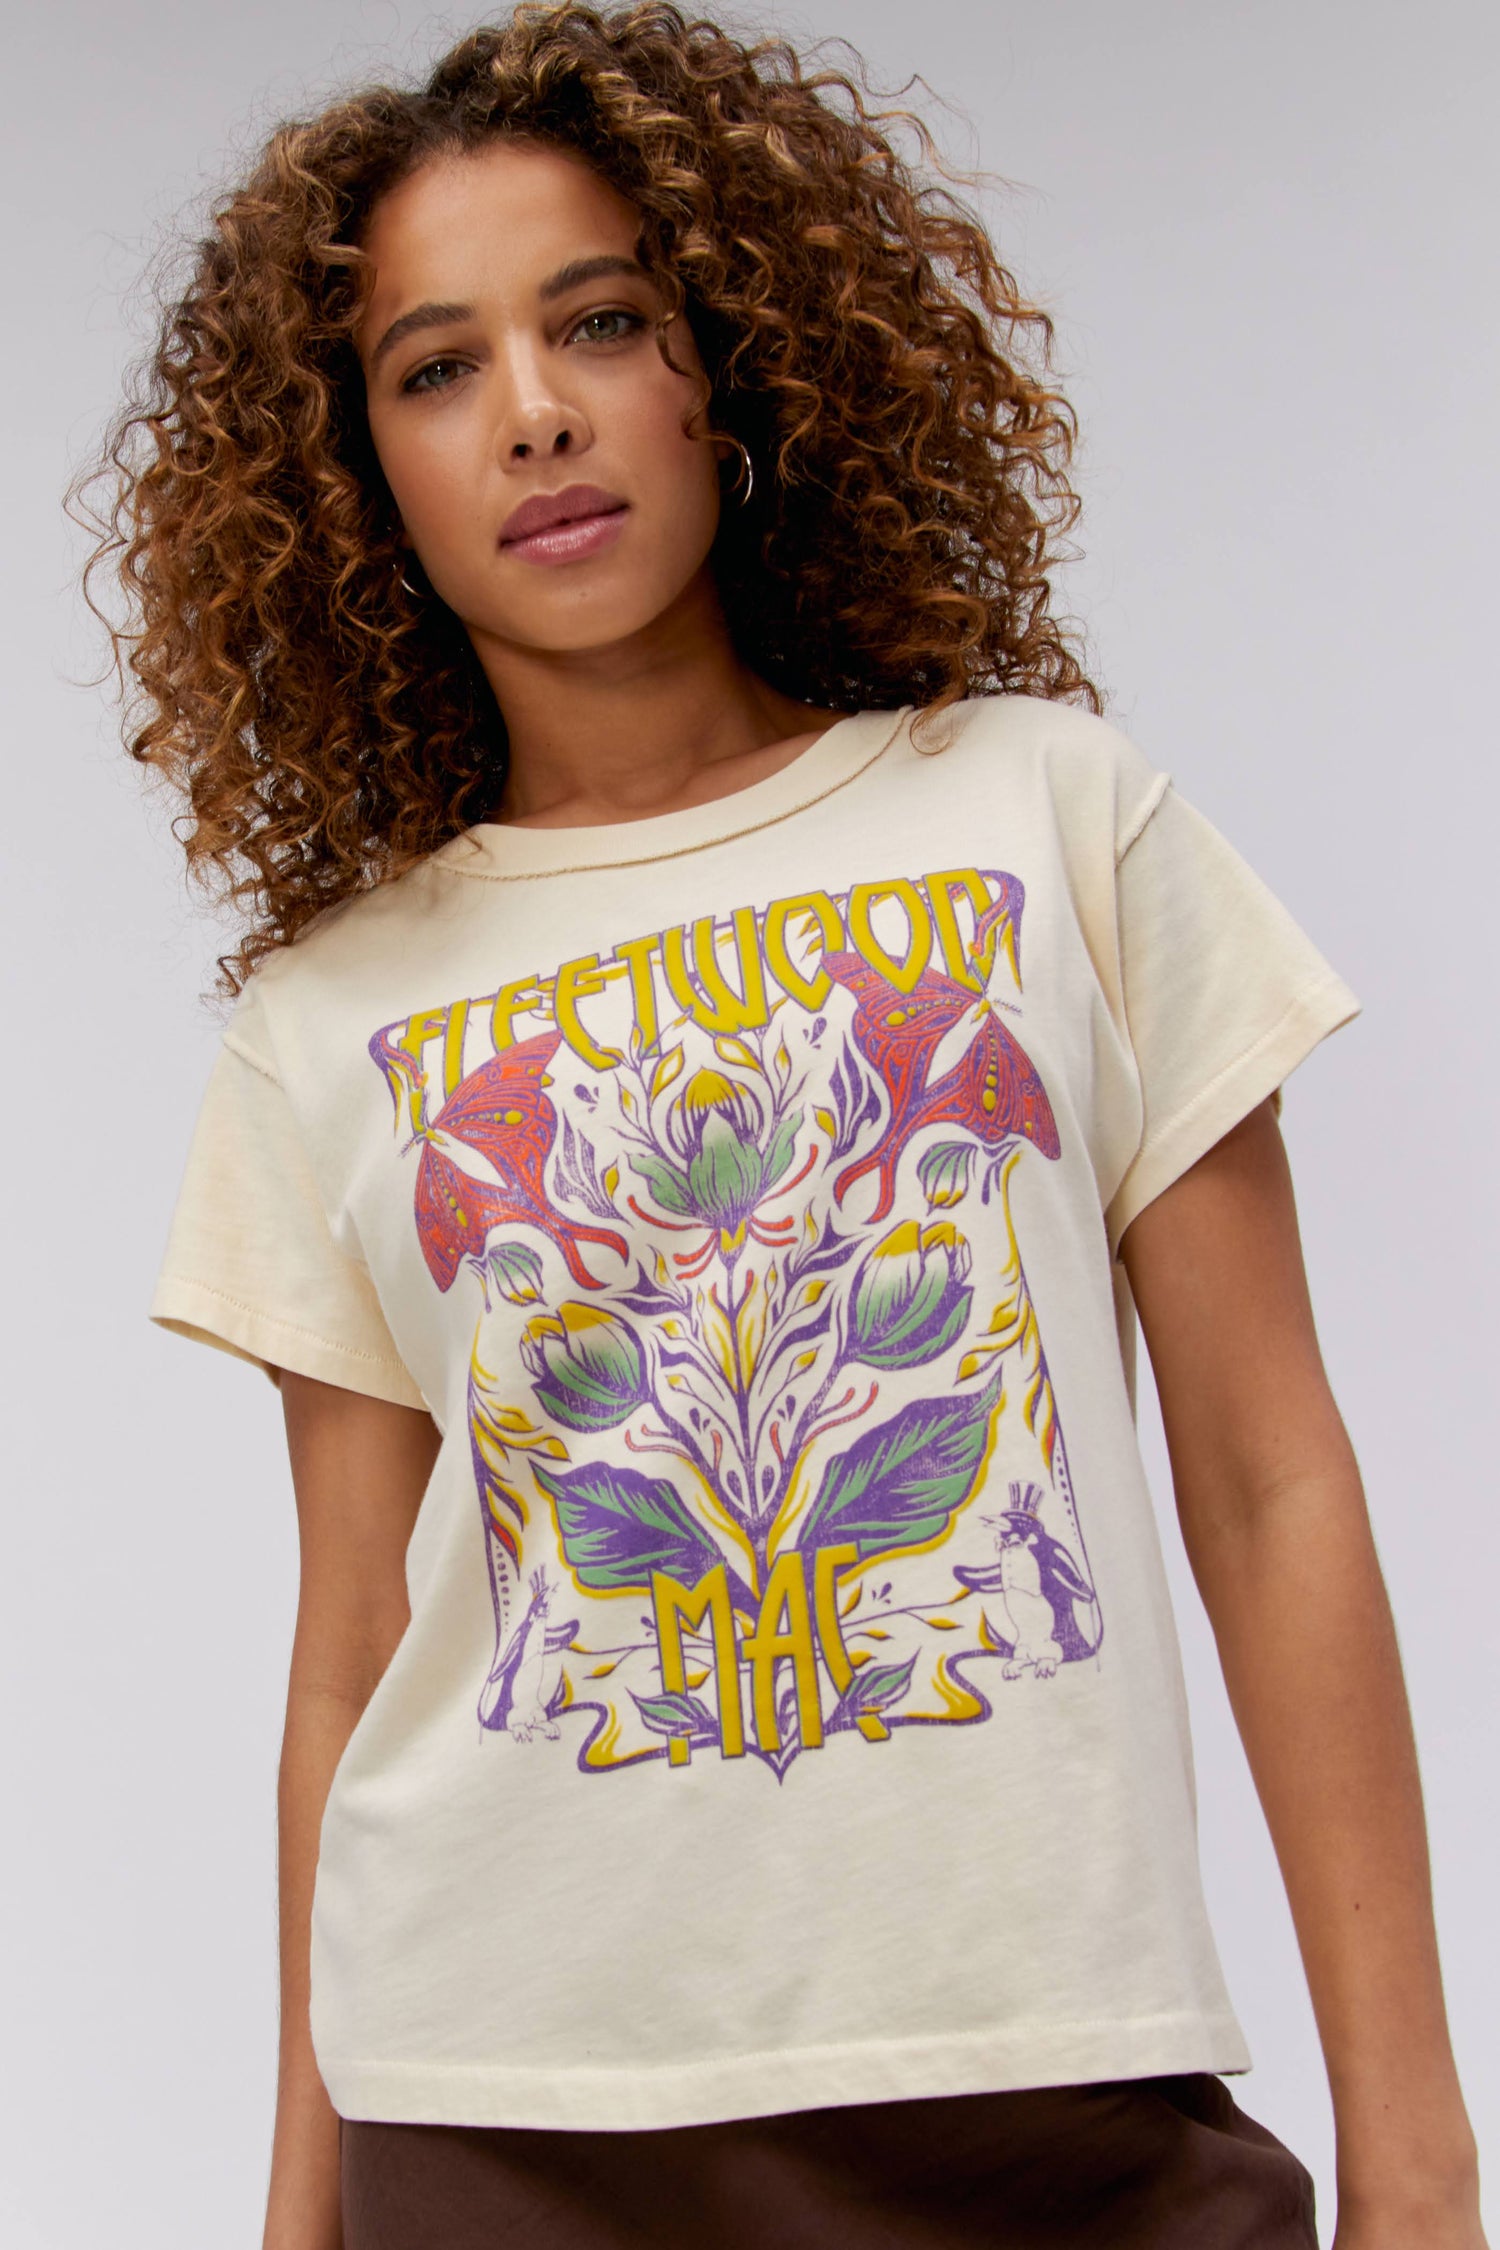 A curly-haired model featuring a parchment-colored tee stamped with the band's name, designed with a graphic of leaves, flowers, and butterflies on the center.